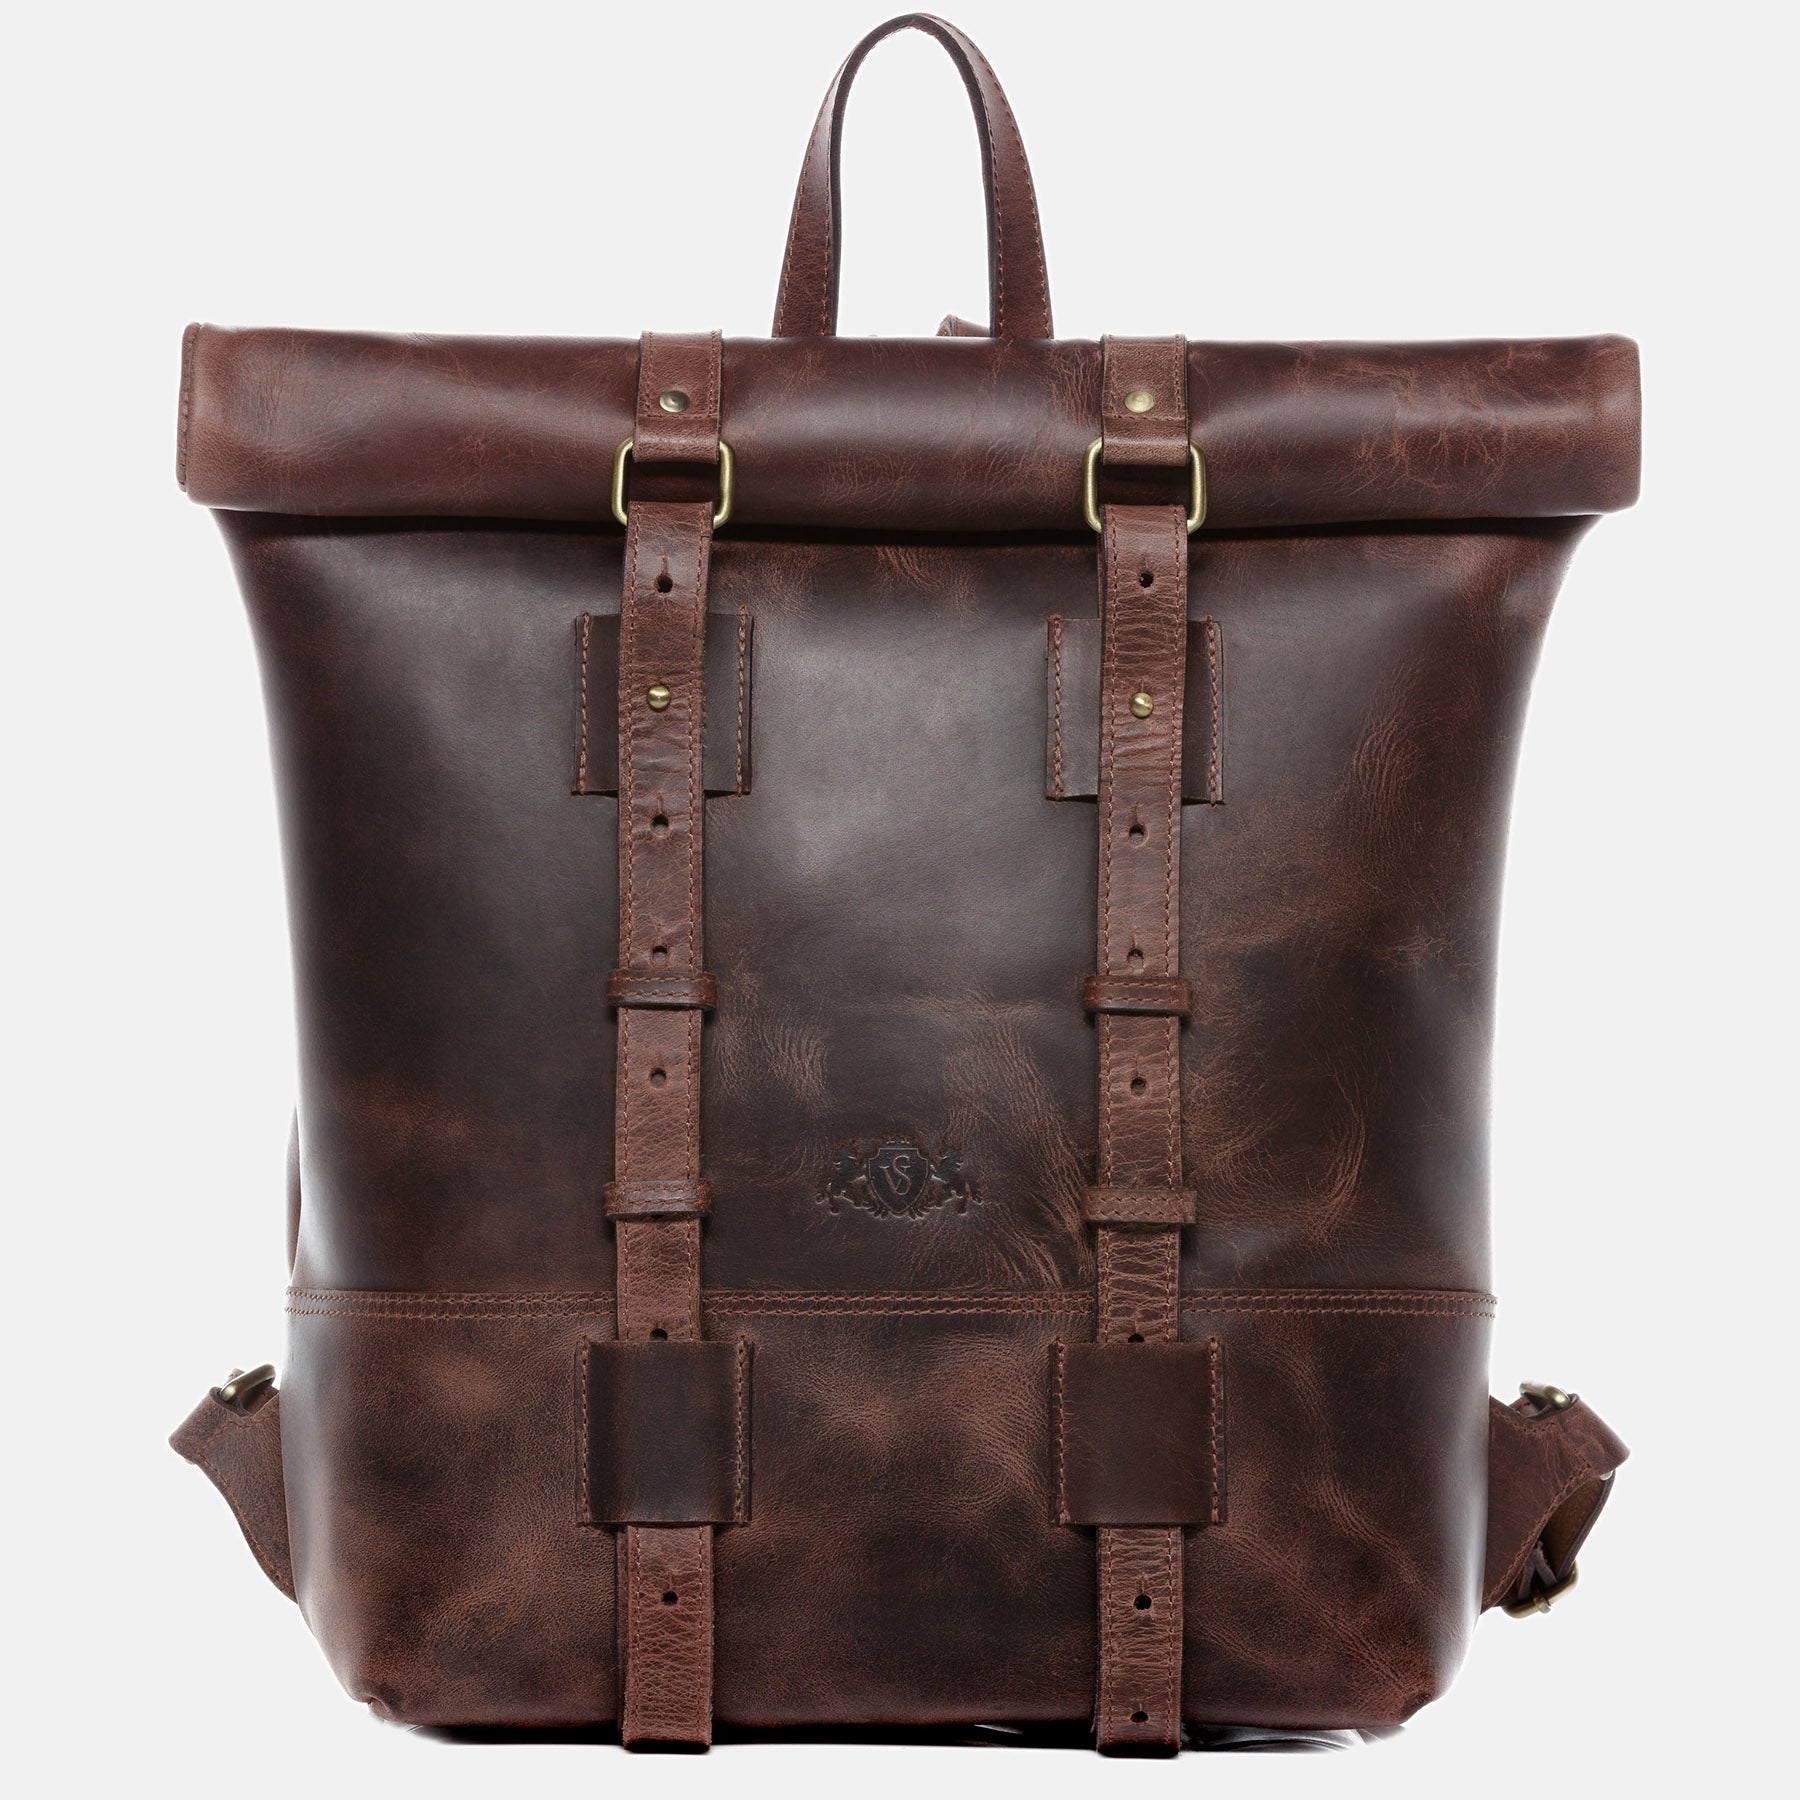 Rolltop backpack CHAZ buffalo leather vintage brown